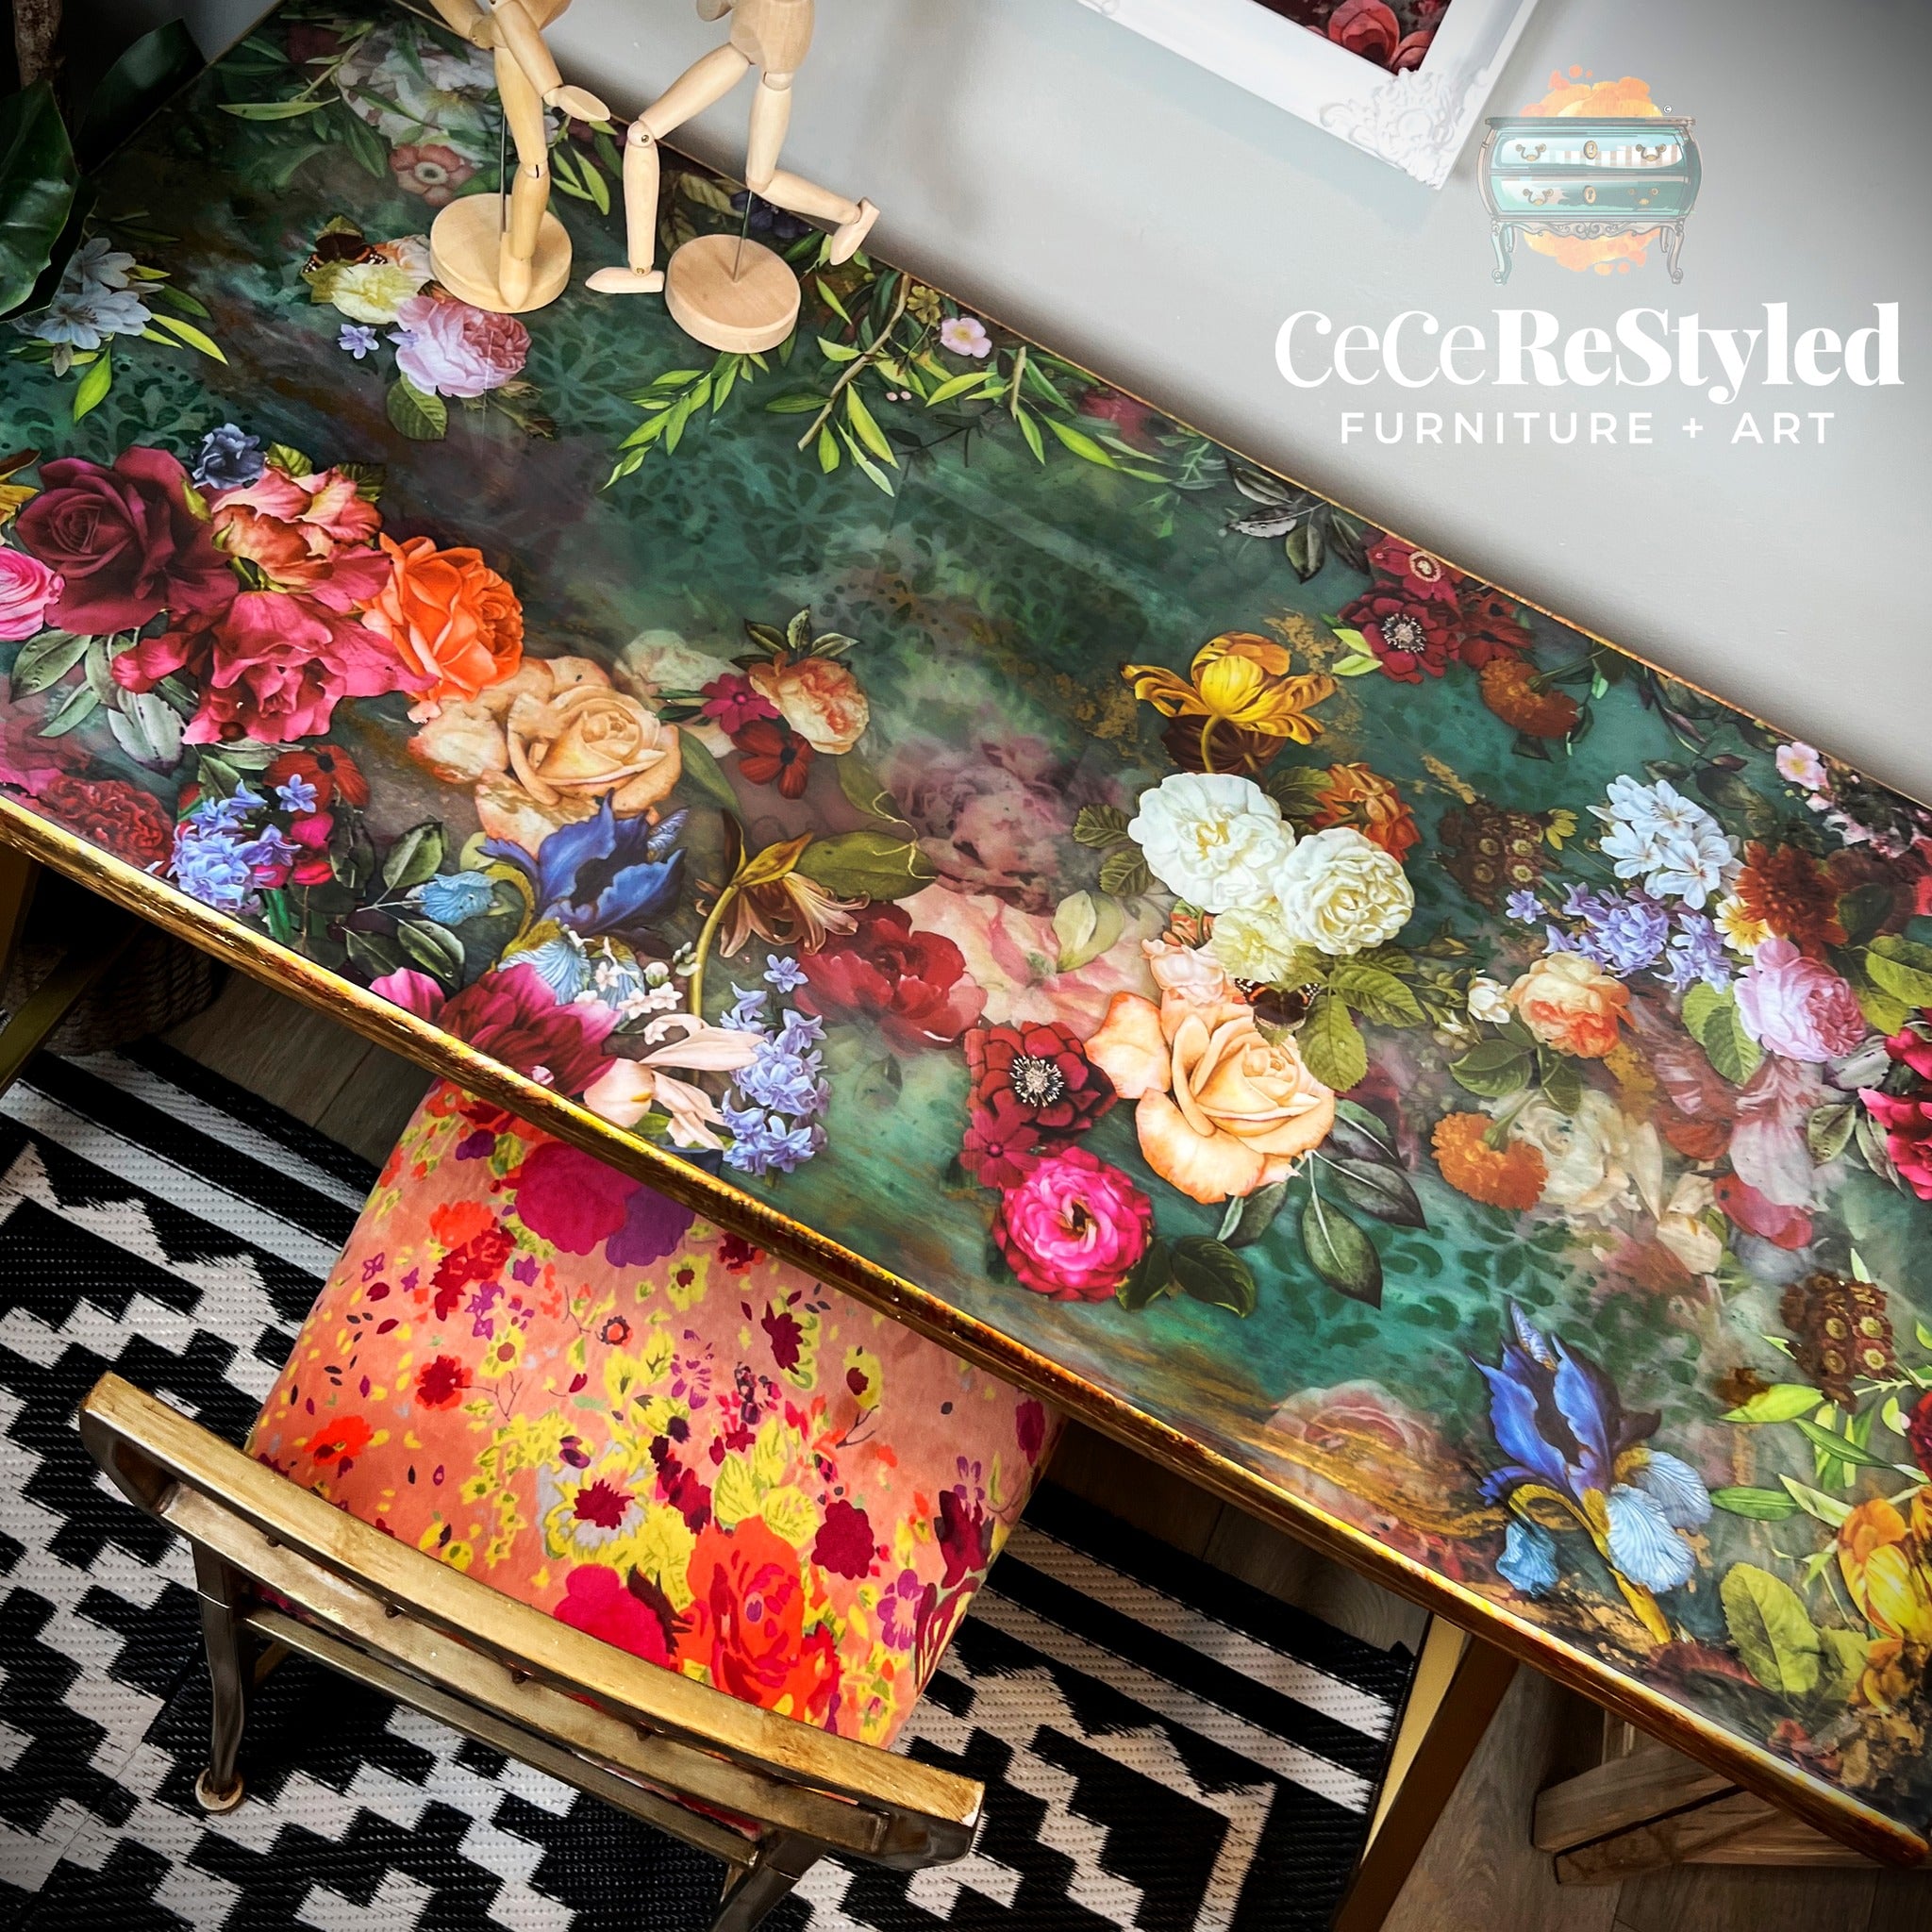 A desk refurbished by CeCe ReStyled features ReDesign with Prima's Blossomed Beauties small transfer on the desktop along with other floral transfers to create a beautiful flower garden against a dark green teal background.